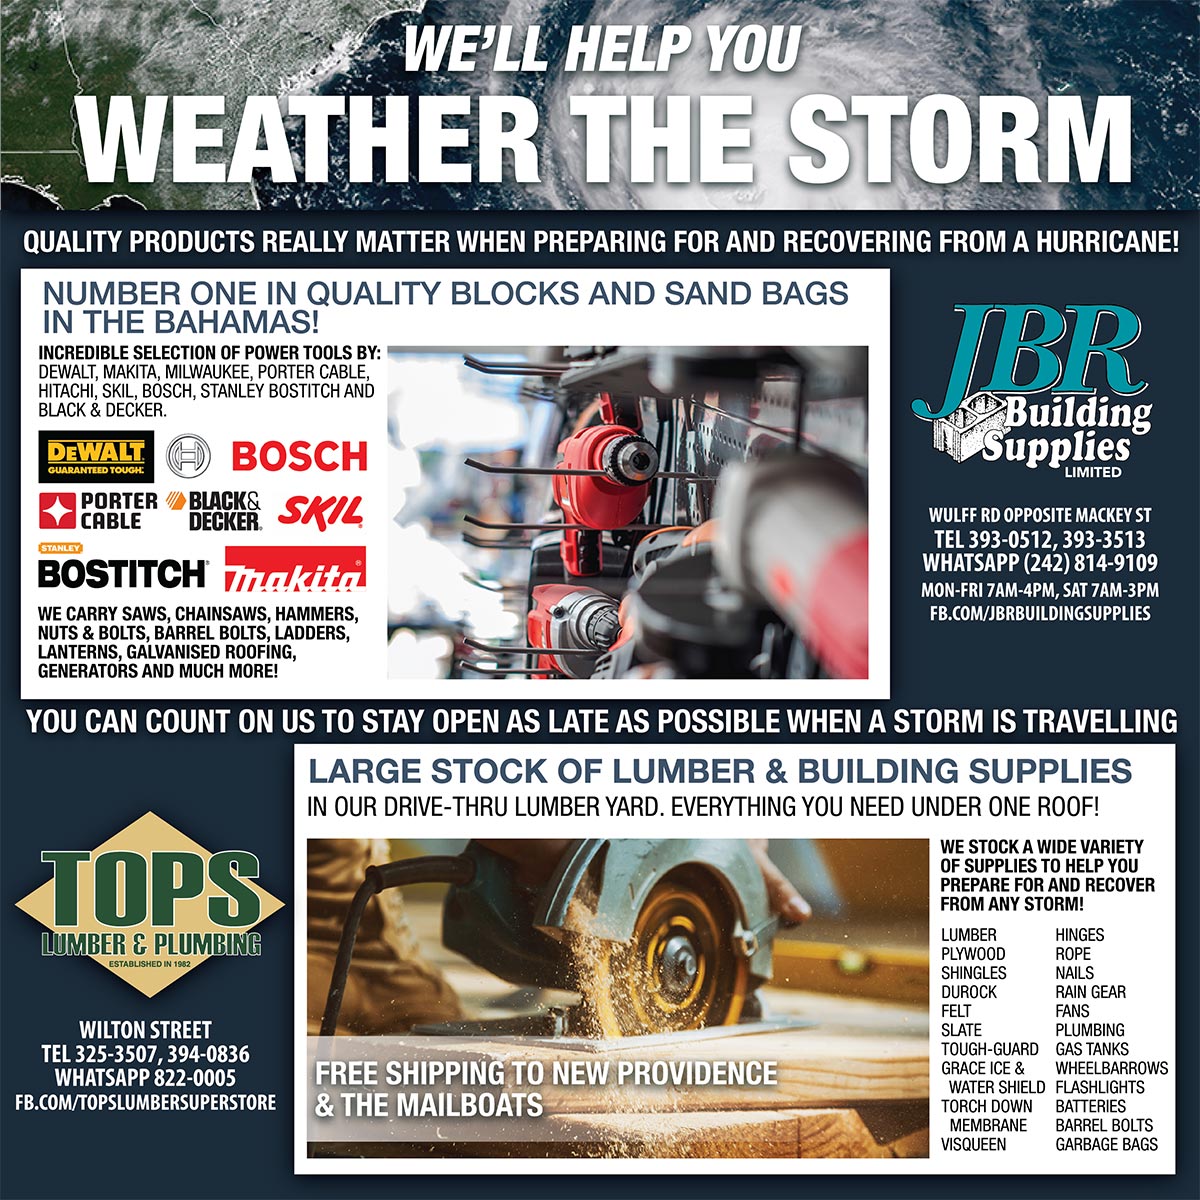 We'll Help You Weather The Storm at JBR Building Supplies Ltd and Tops Lumber